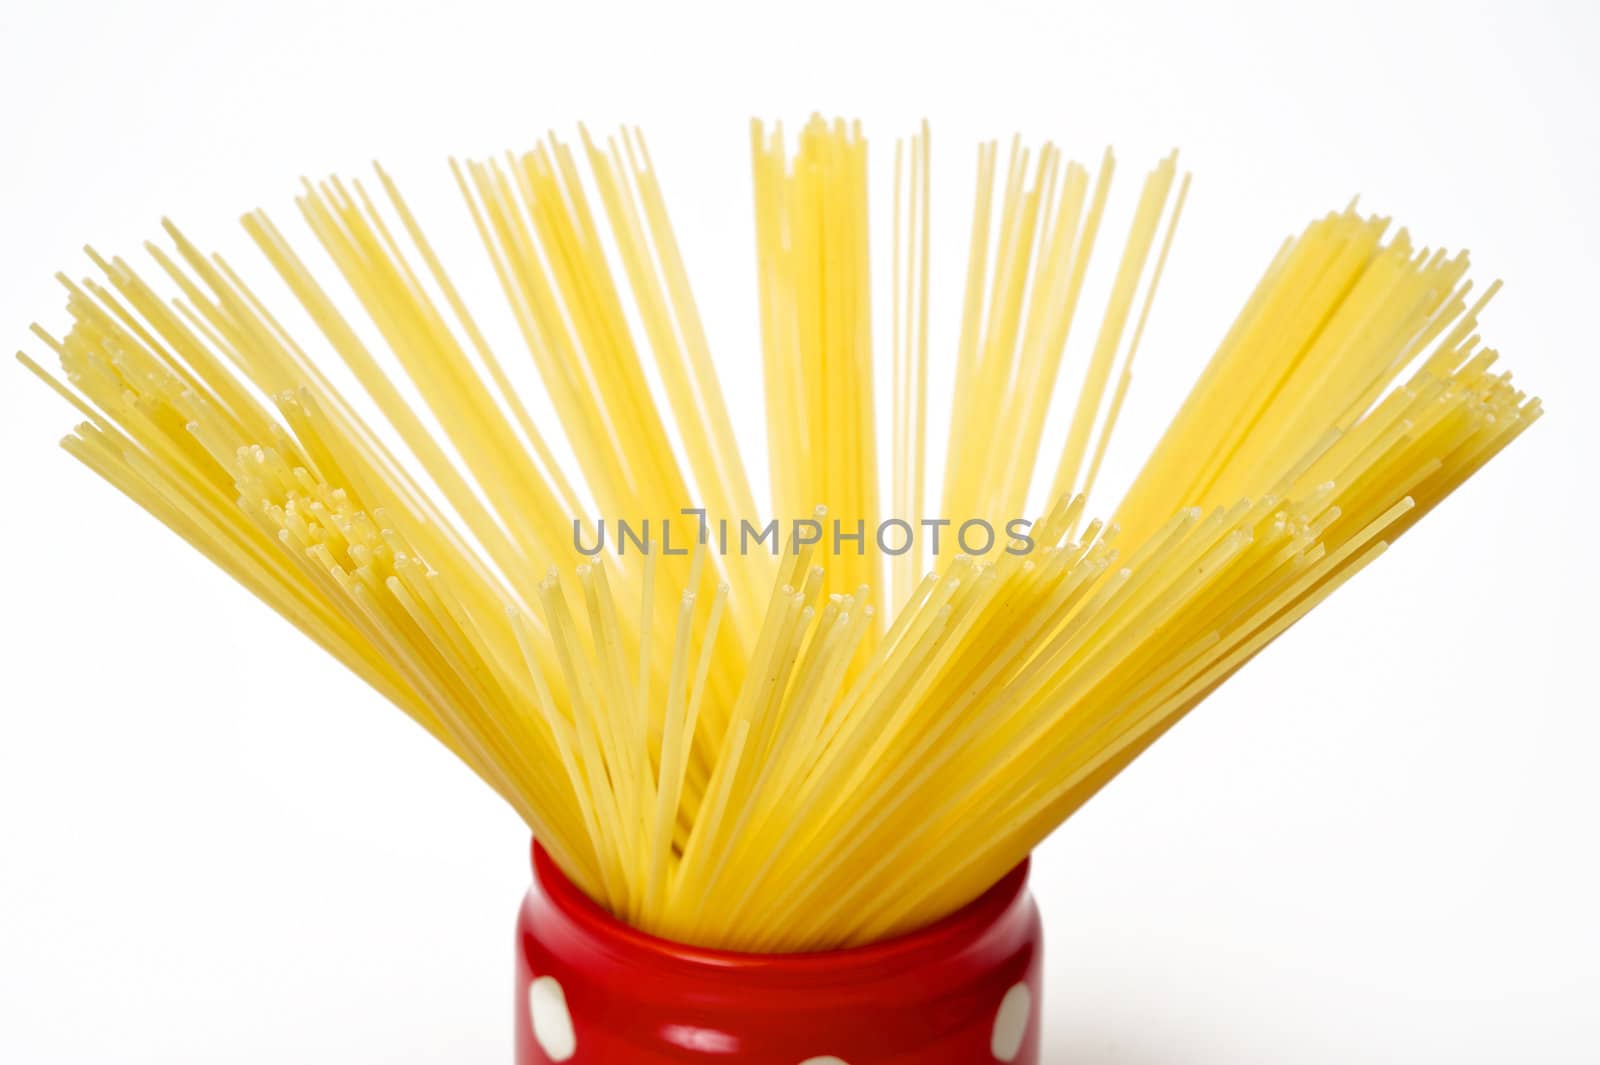 Closeup spaghetti inside a red jar isolated on white background